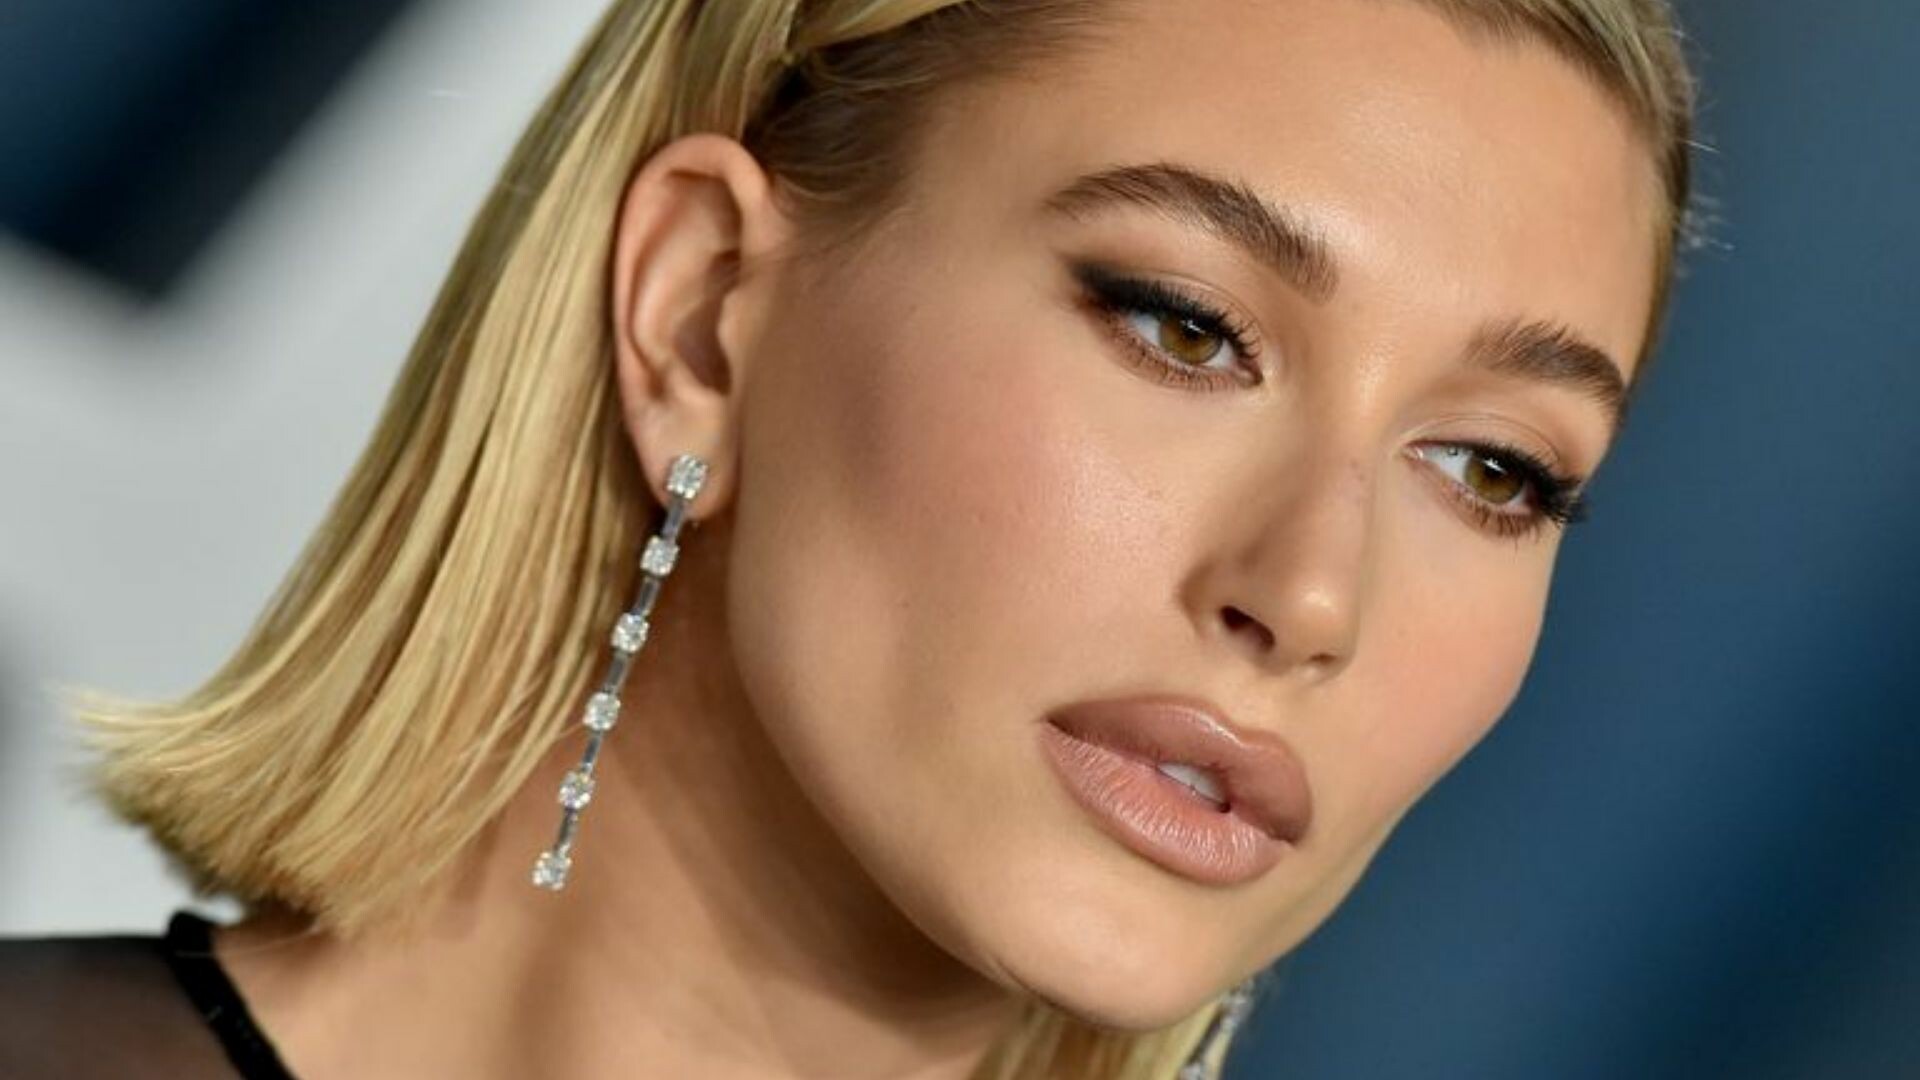 Hailey Bieber, Natural beauty, Barefaced wedding day, Flawless complexion, 1920x1080 Full HD Desktop